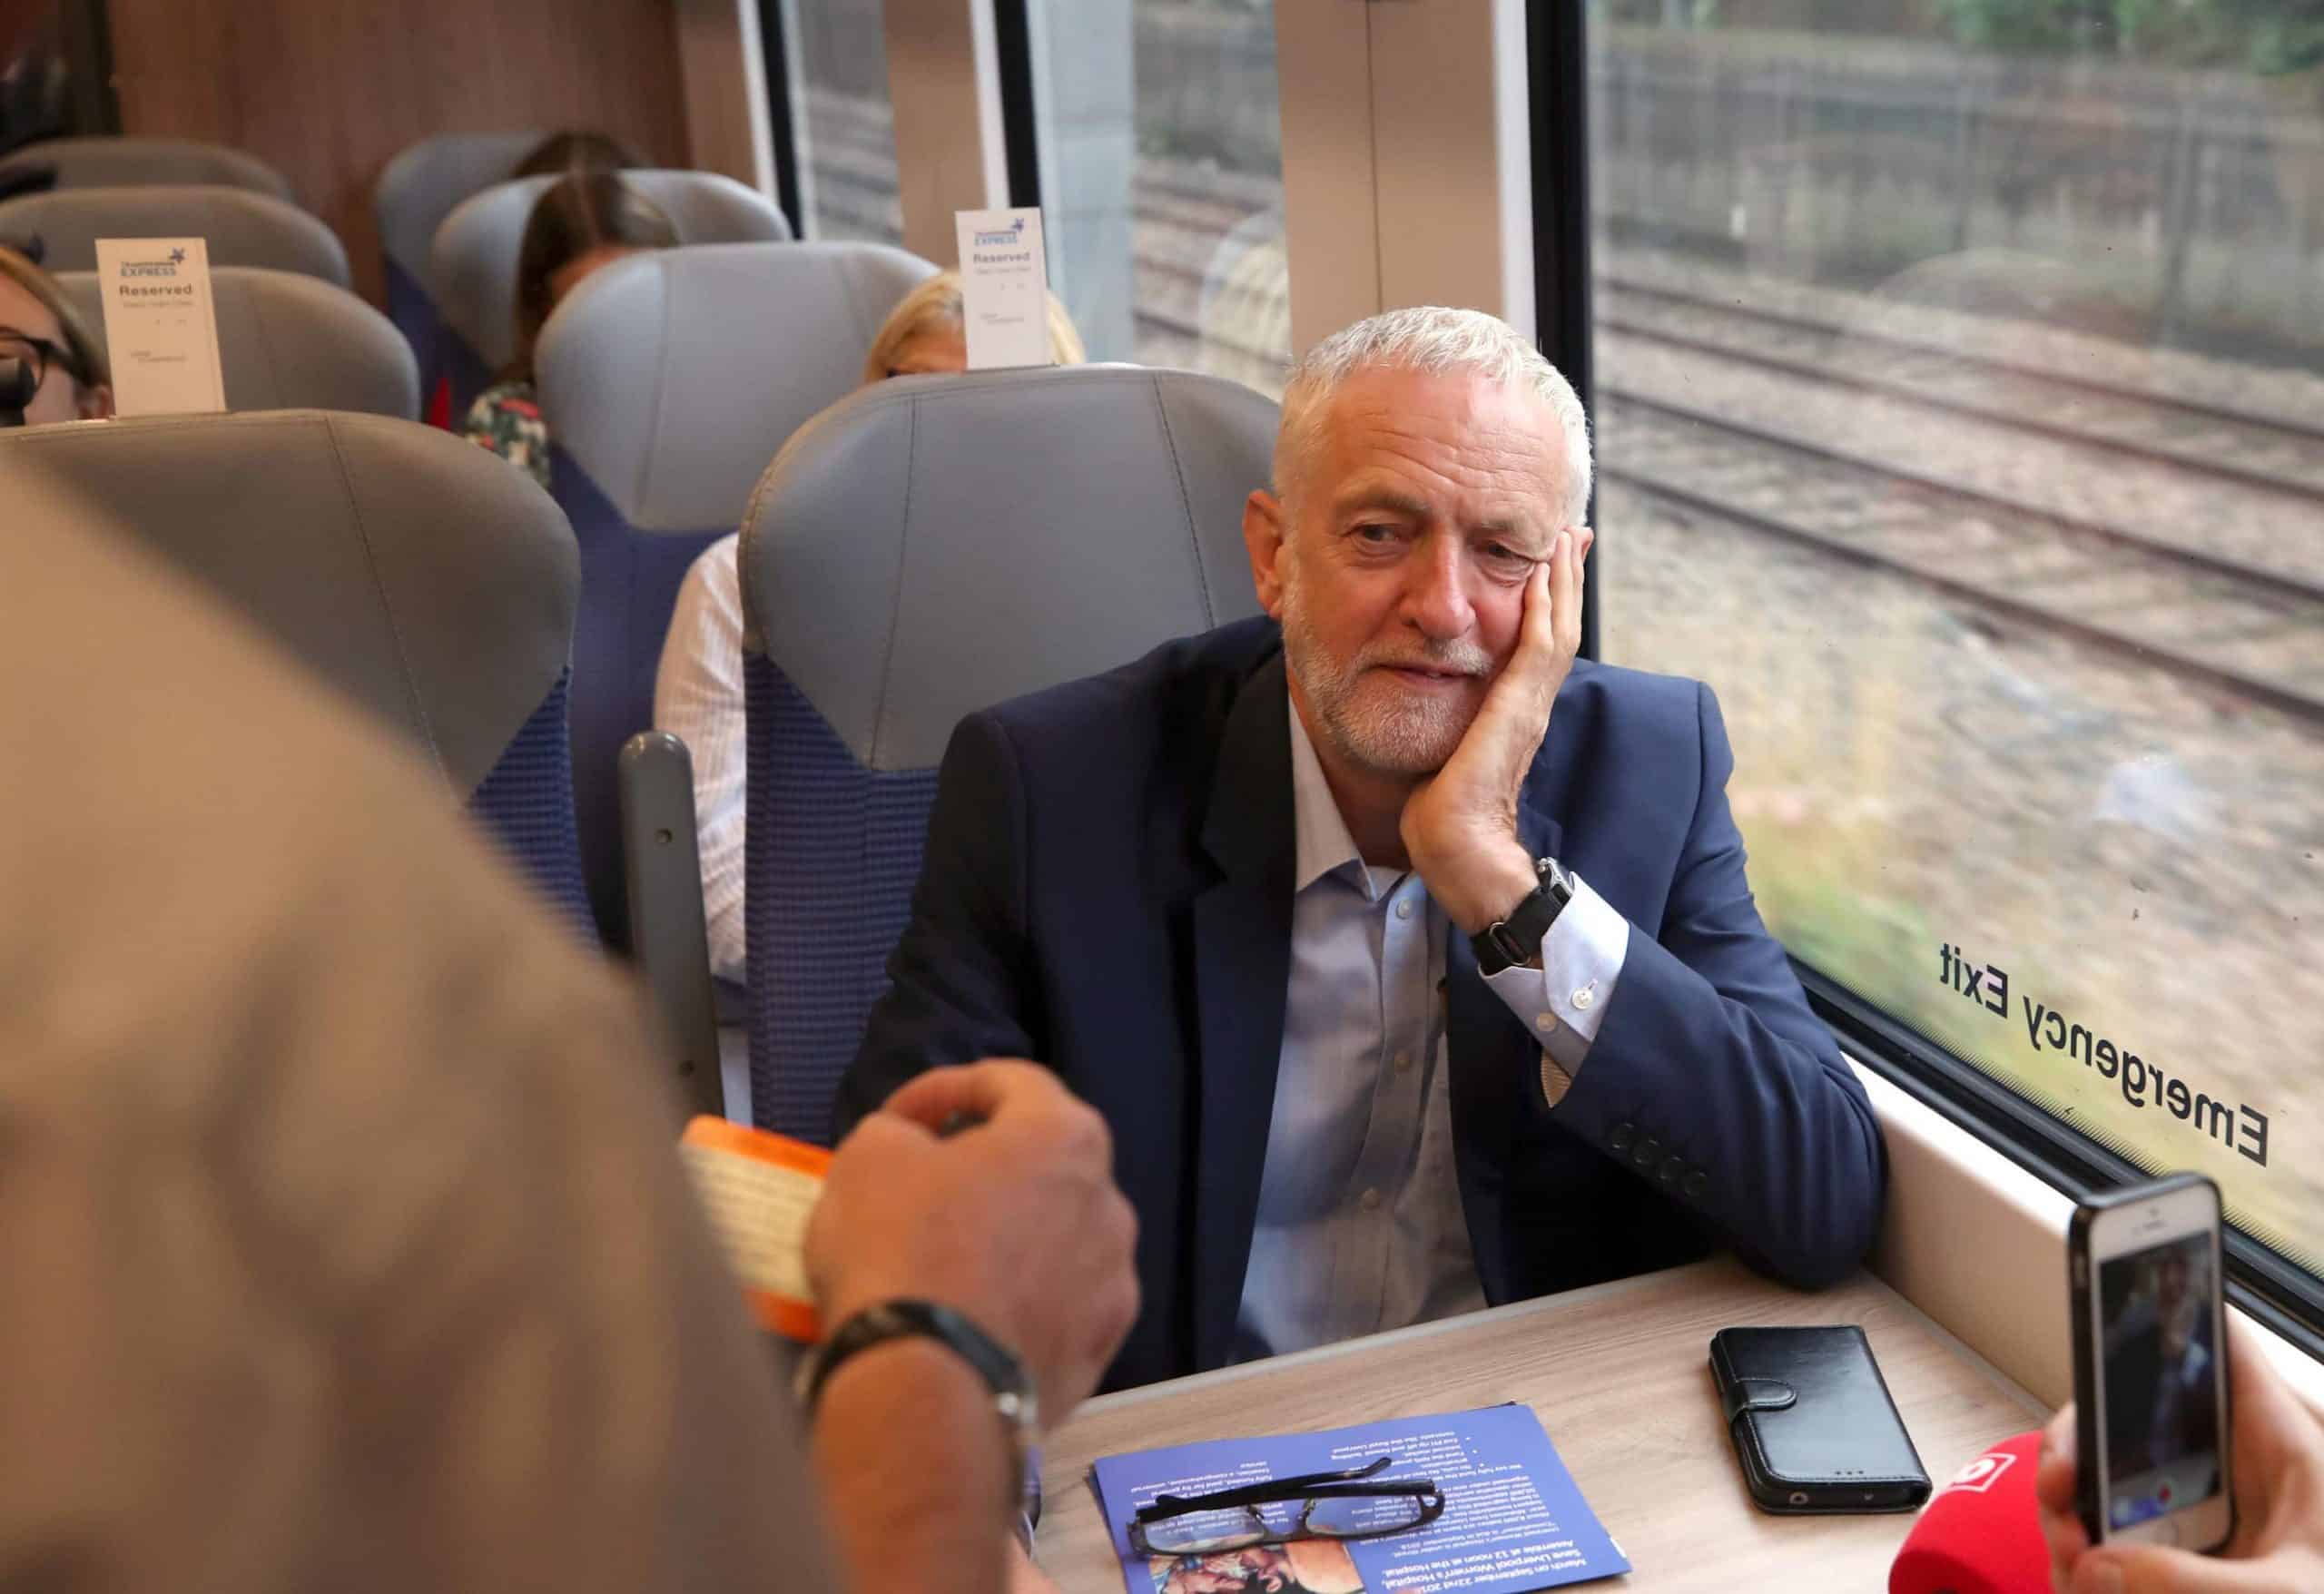 #CorbynWasRight trends after Tories unveil new railway plans